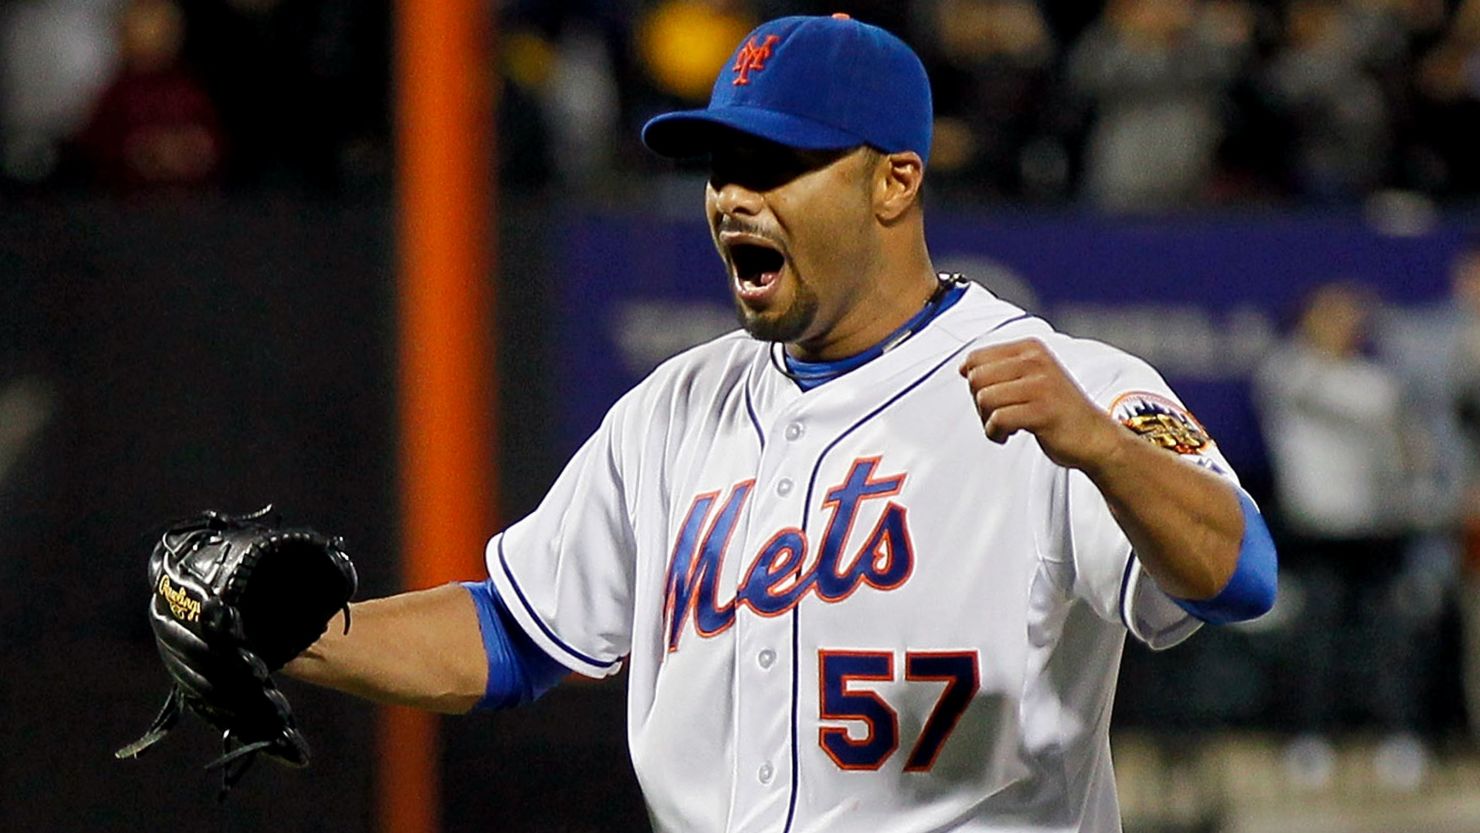 Johan Santana exults after striking out the last batter to secure his and the Mets' first no-hitter.